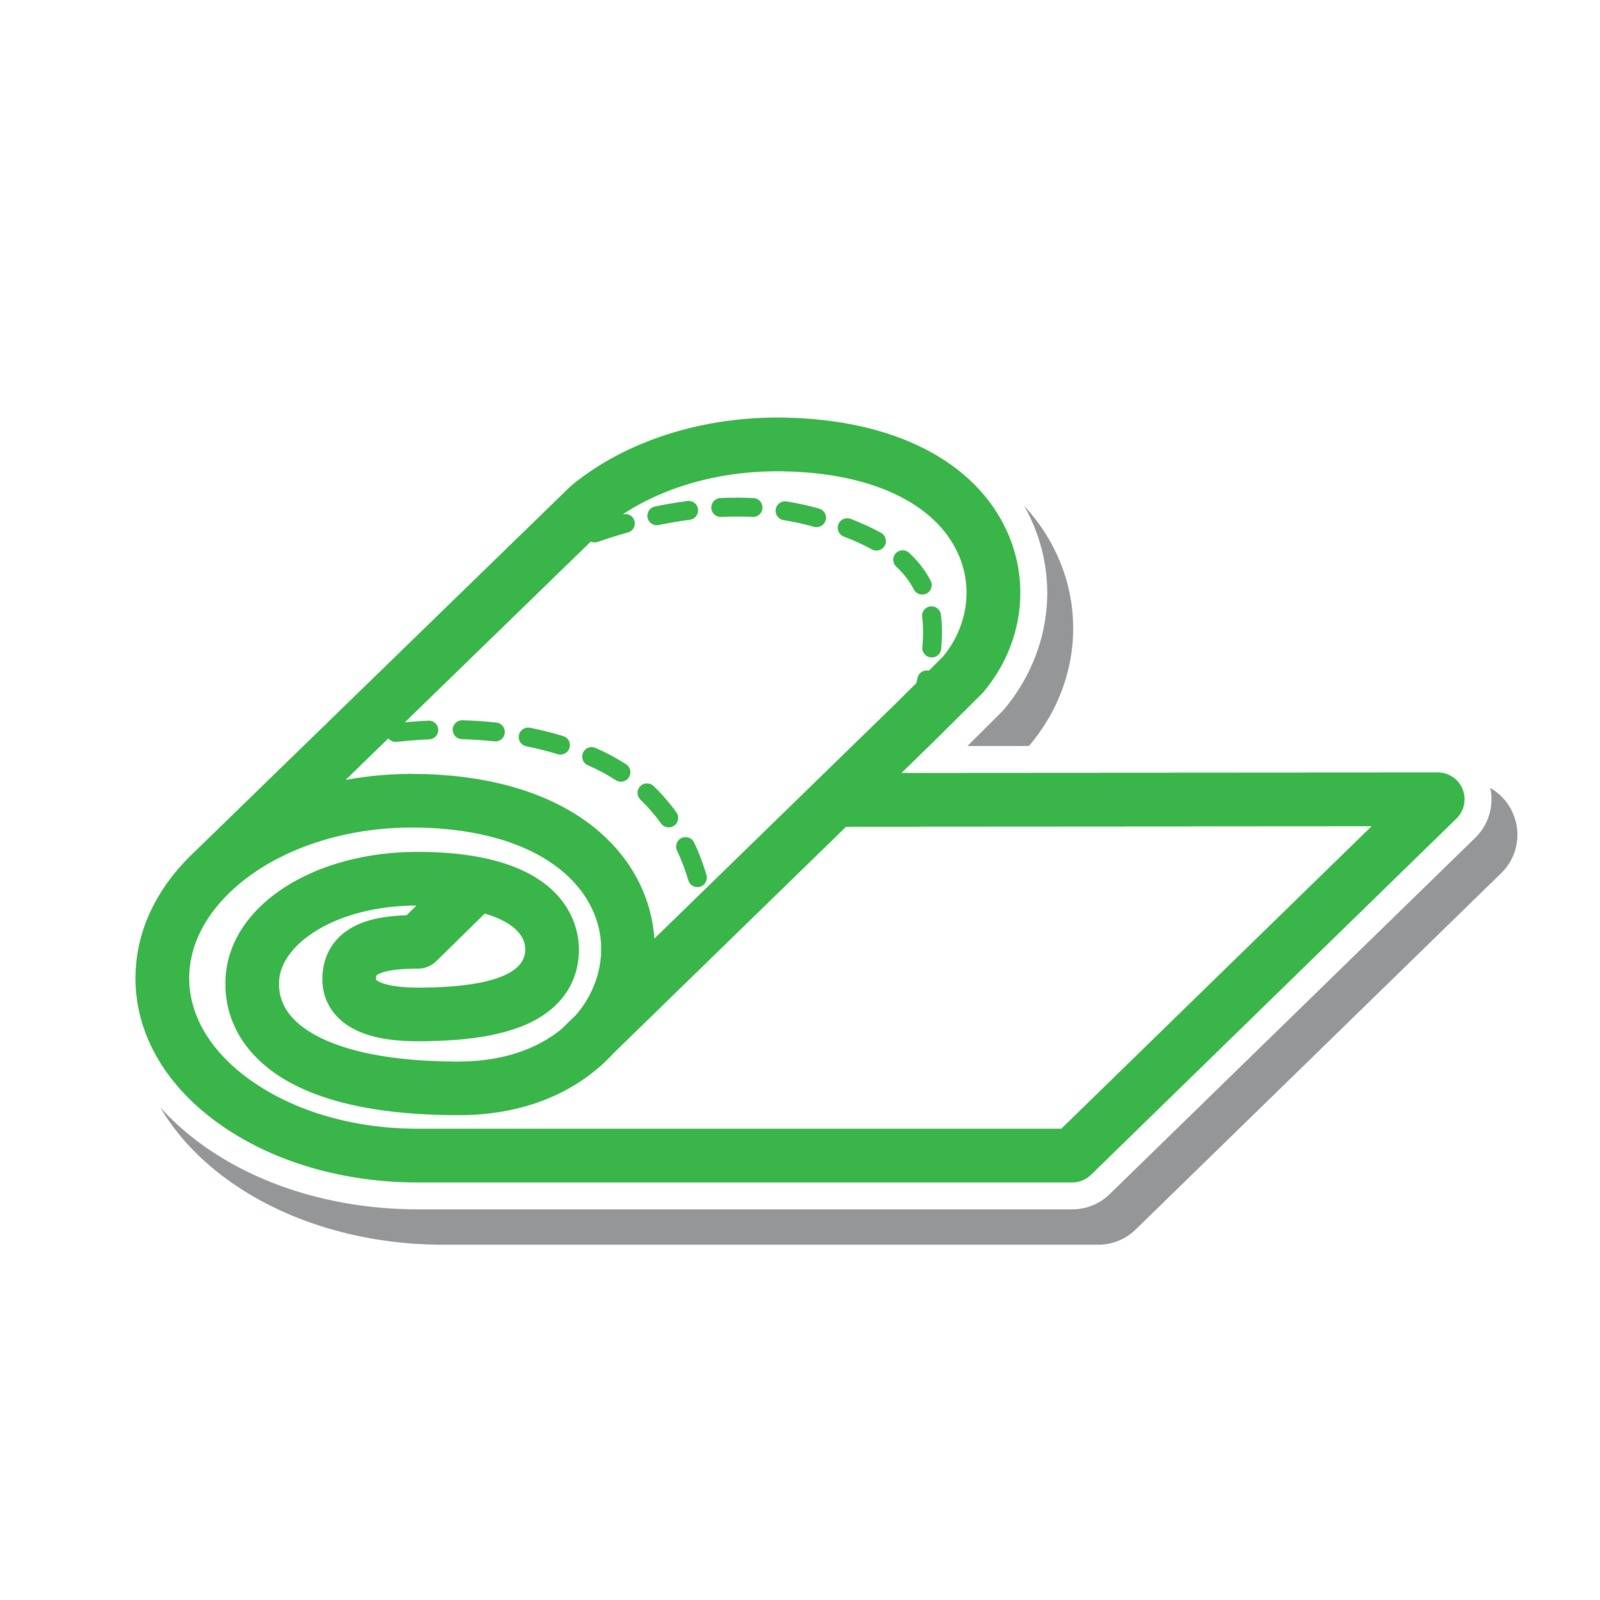 Thin line towel icon by ang_bay